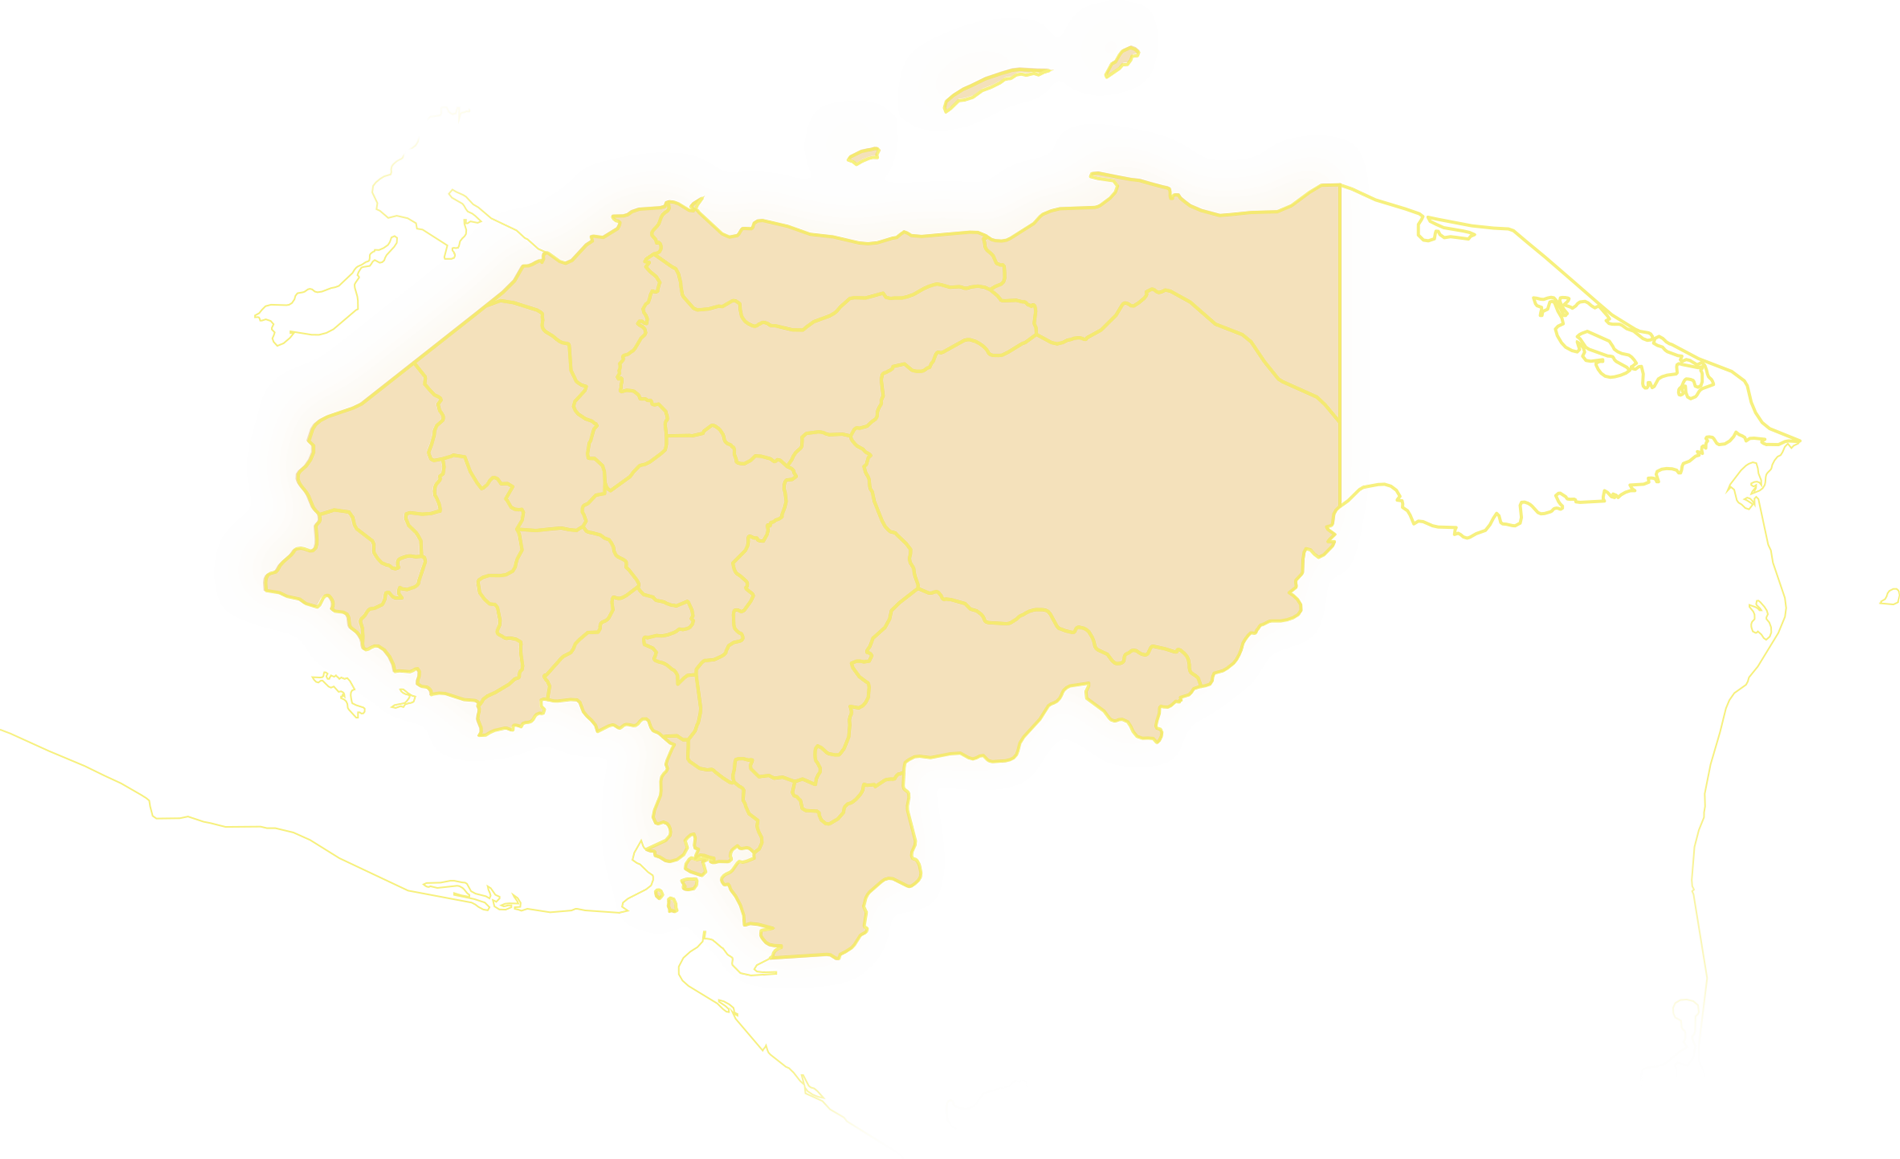 A Map Of Countries/regions With Yellow Lines